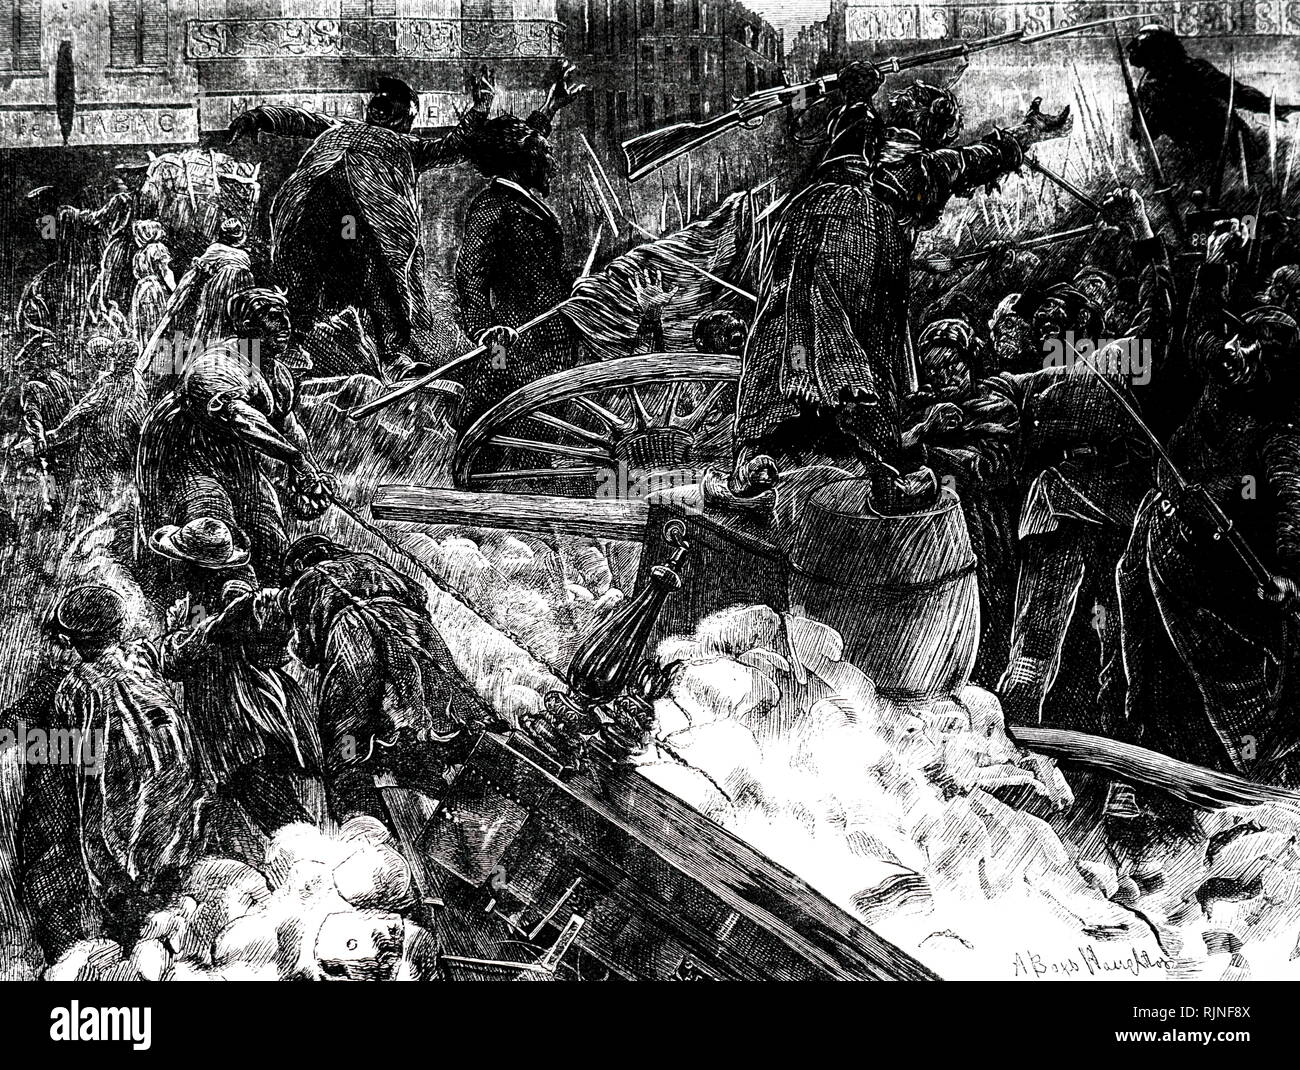 An engraving depicting the Paris Commune - The mob at Paris barricade. Stock Photo